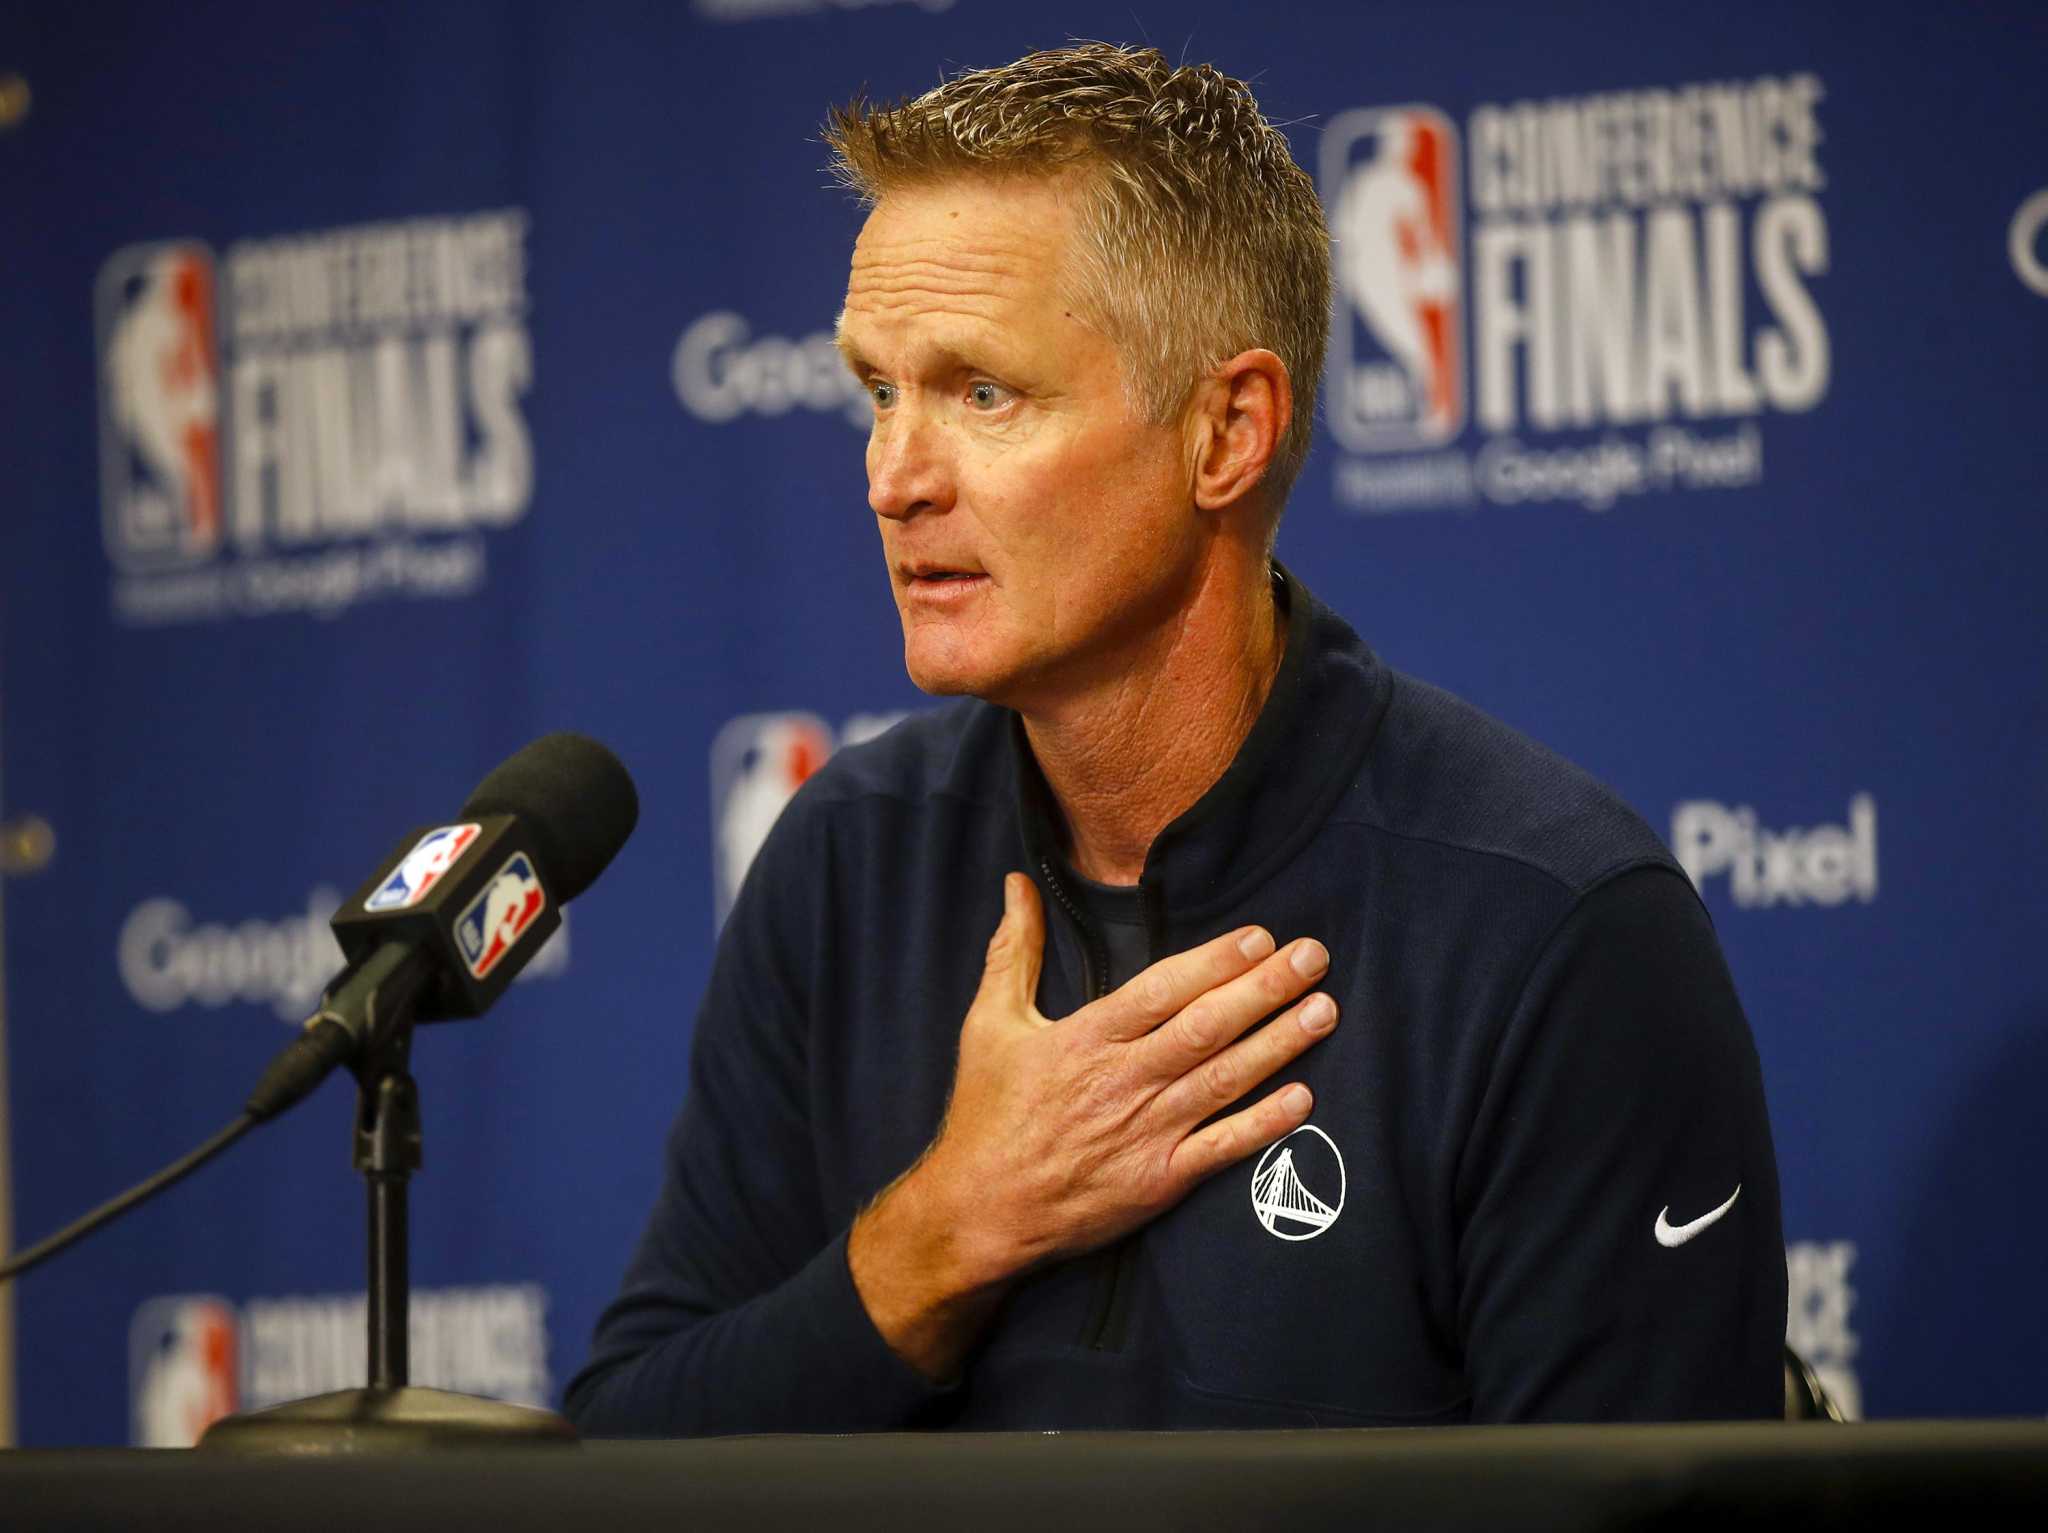 Fact-checking Steve Kerr on 'universal' background check support